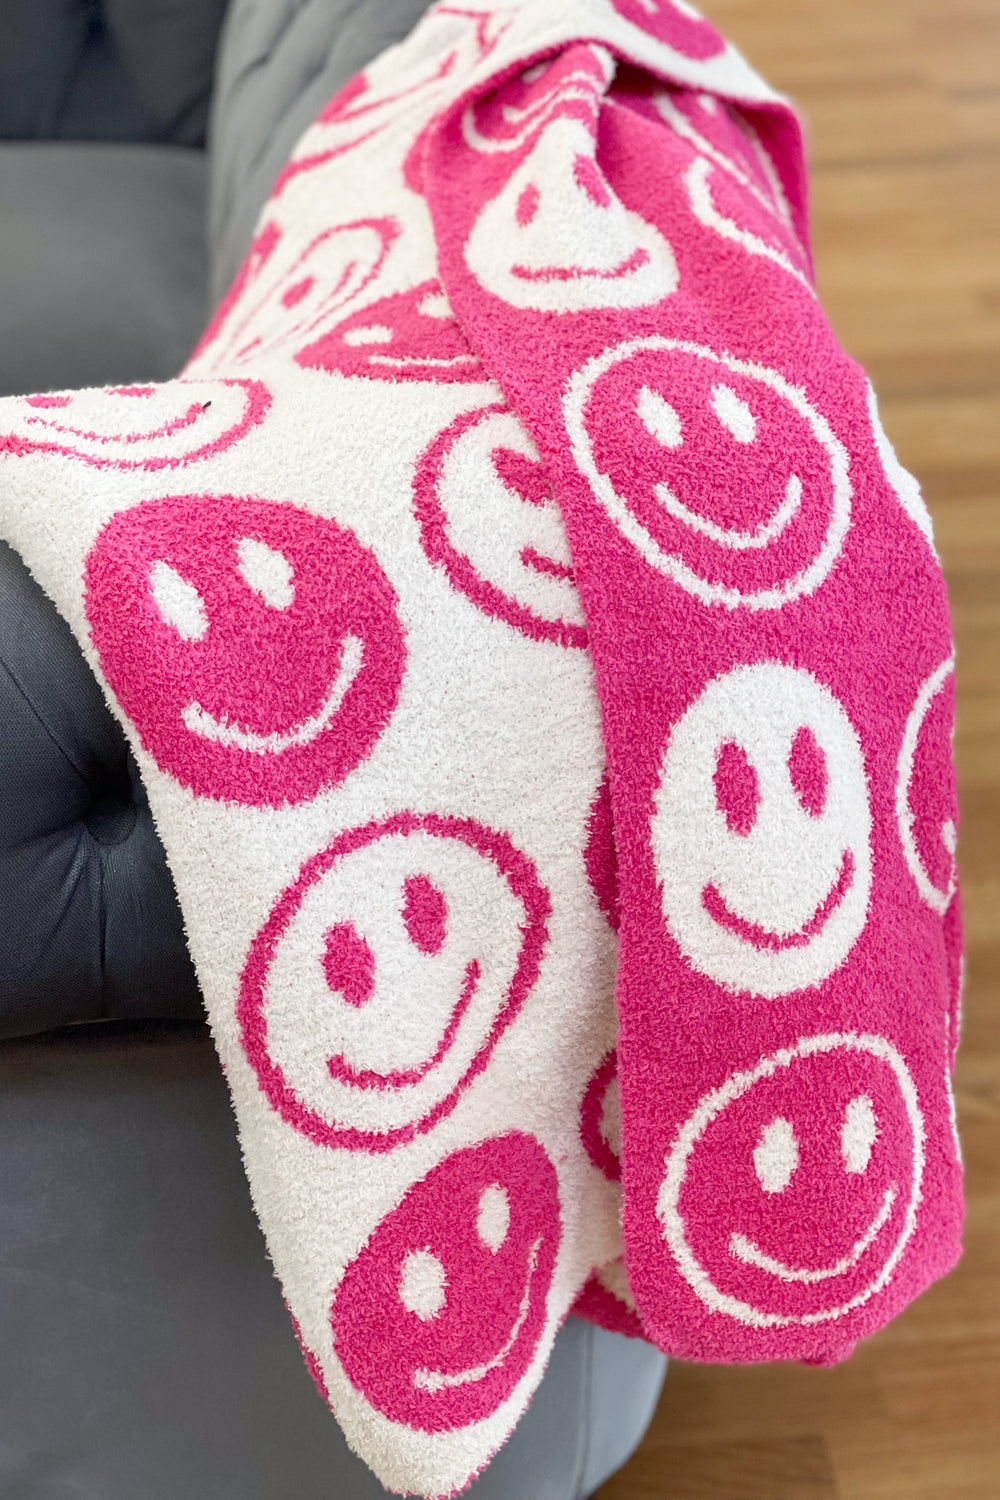 Smiley Face Comfy Luxe Blanket - ShopSpoiled